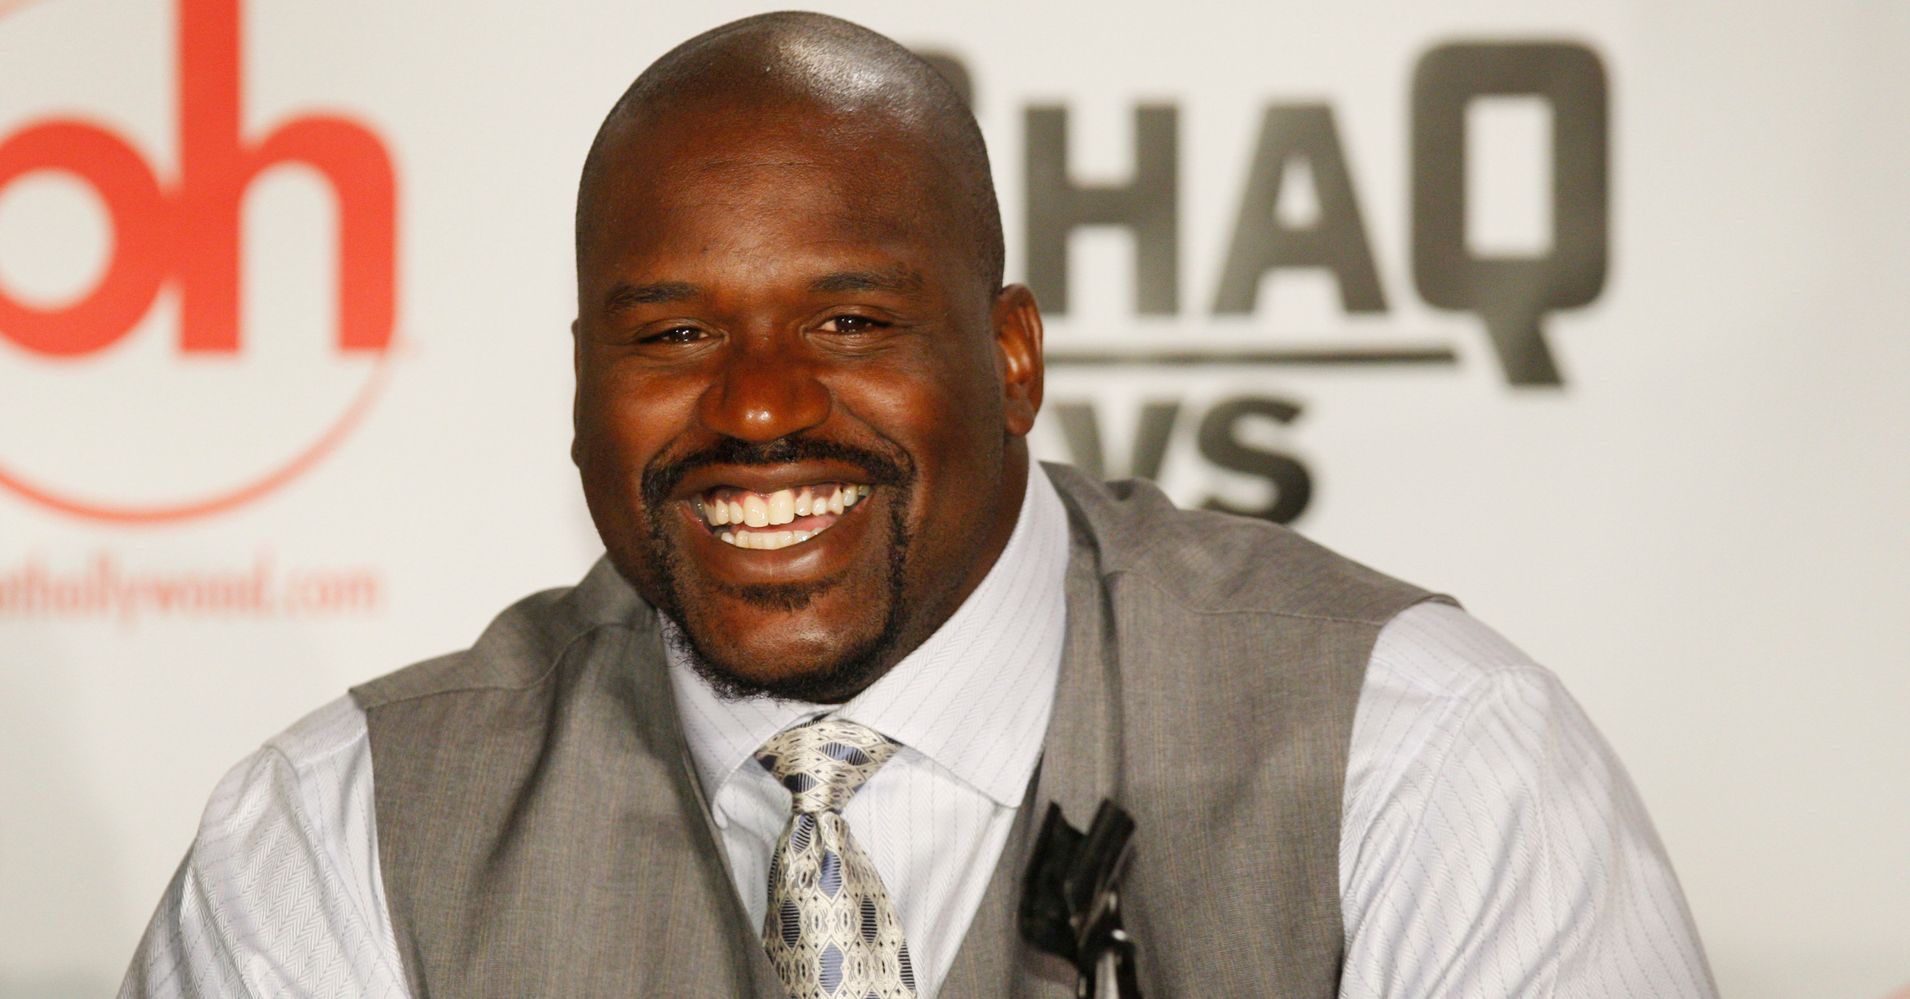 Shaq Says He's Planning To Run For Sheriff | HuffPost